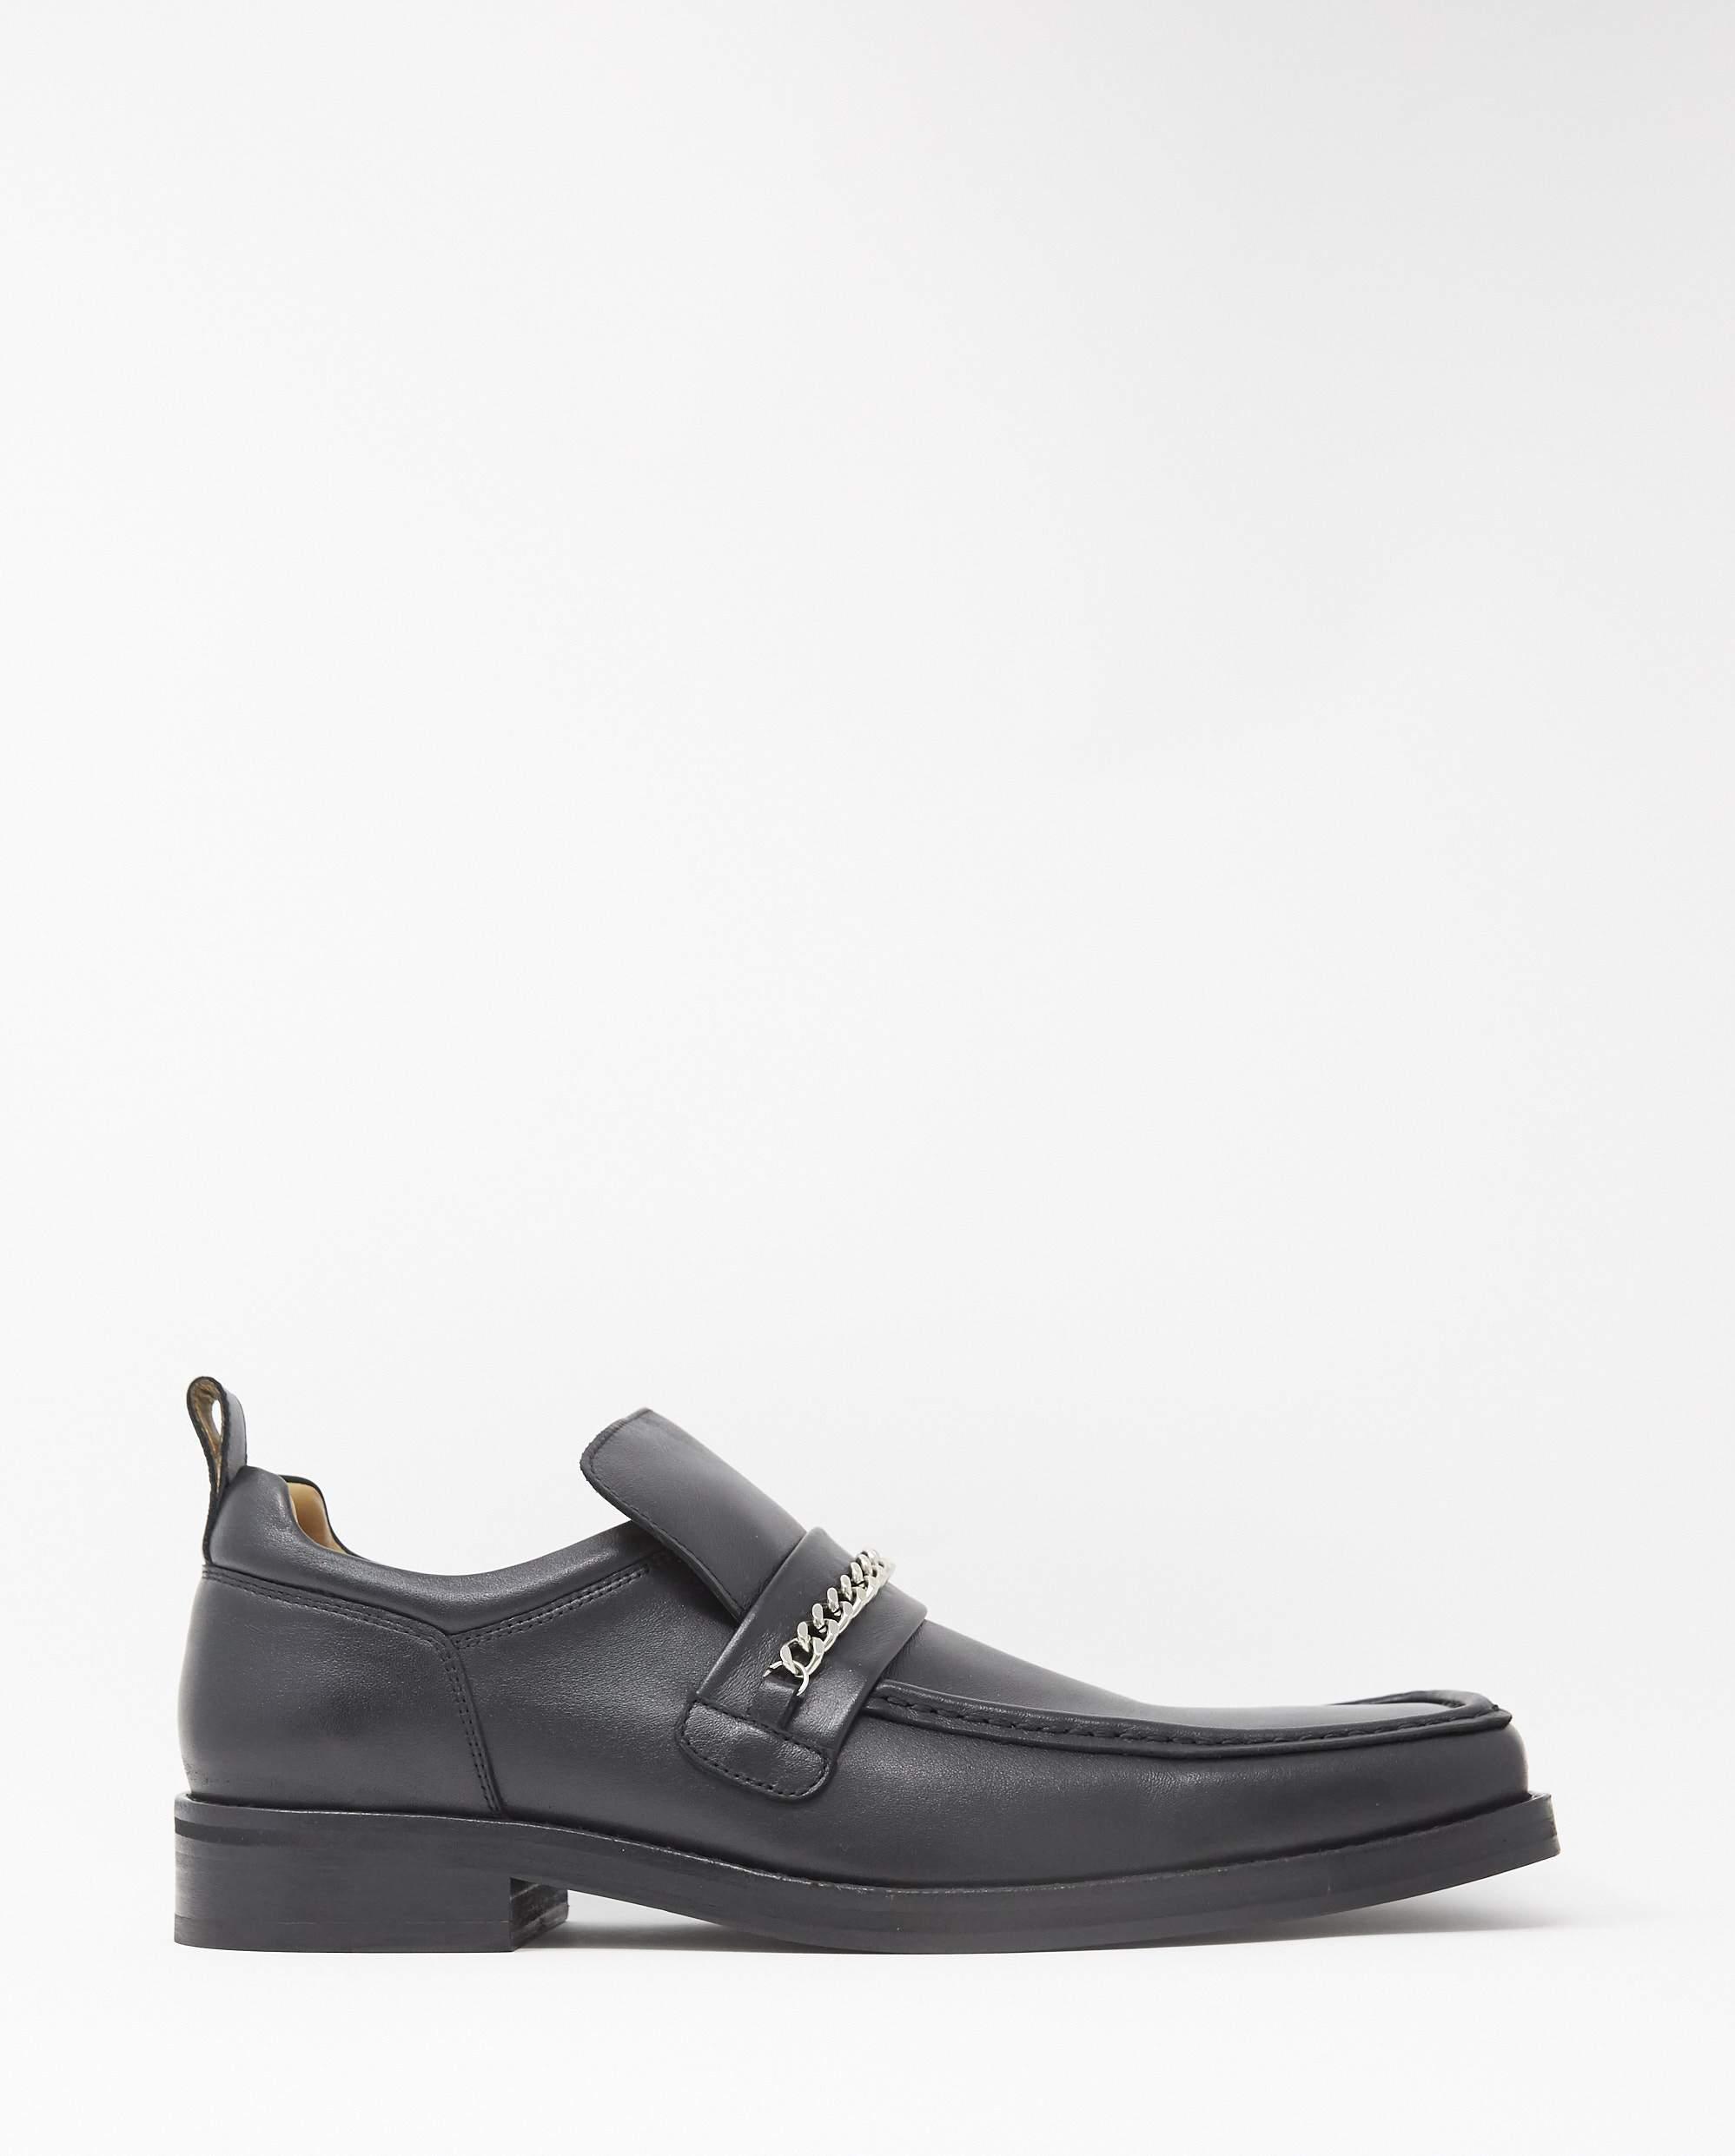 Martine Rose Leather Square Toe Loafer Boot M in Black for Men - Lyst